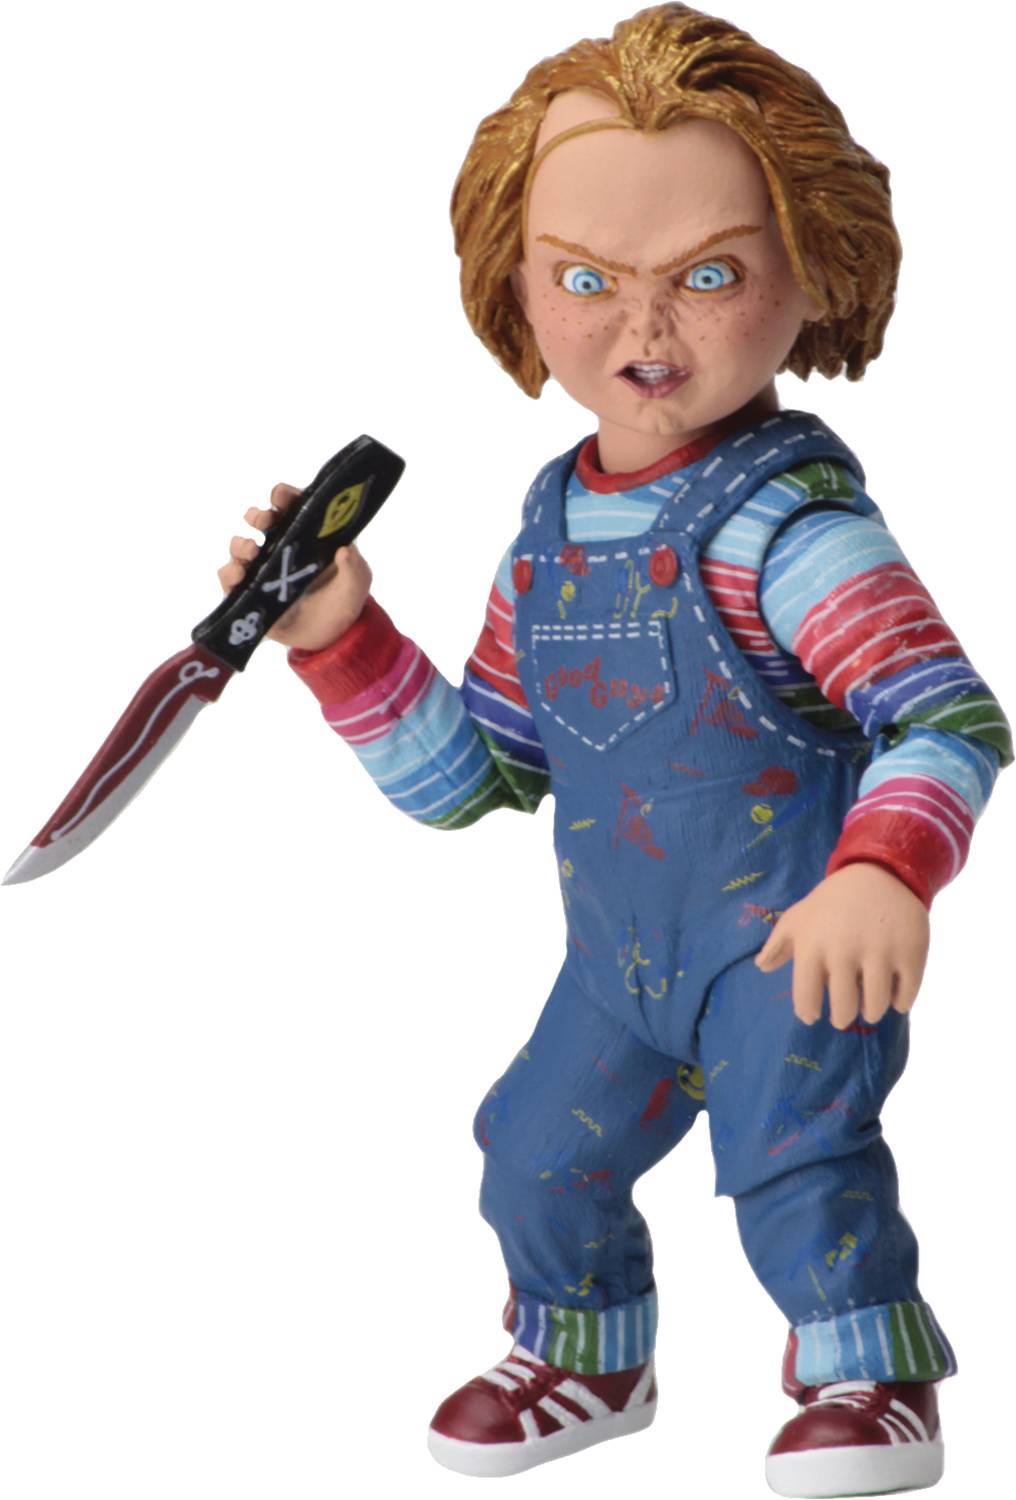 Childs Play Ultimate Chucky 4in Action Figure